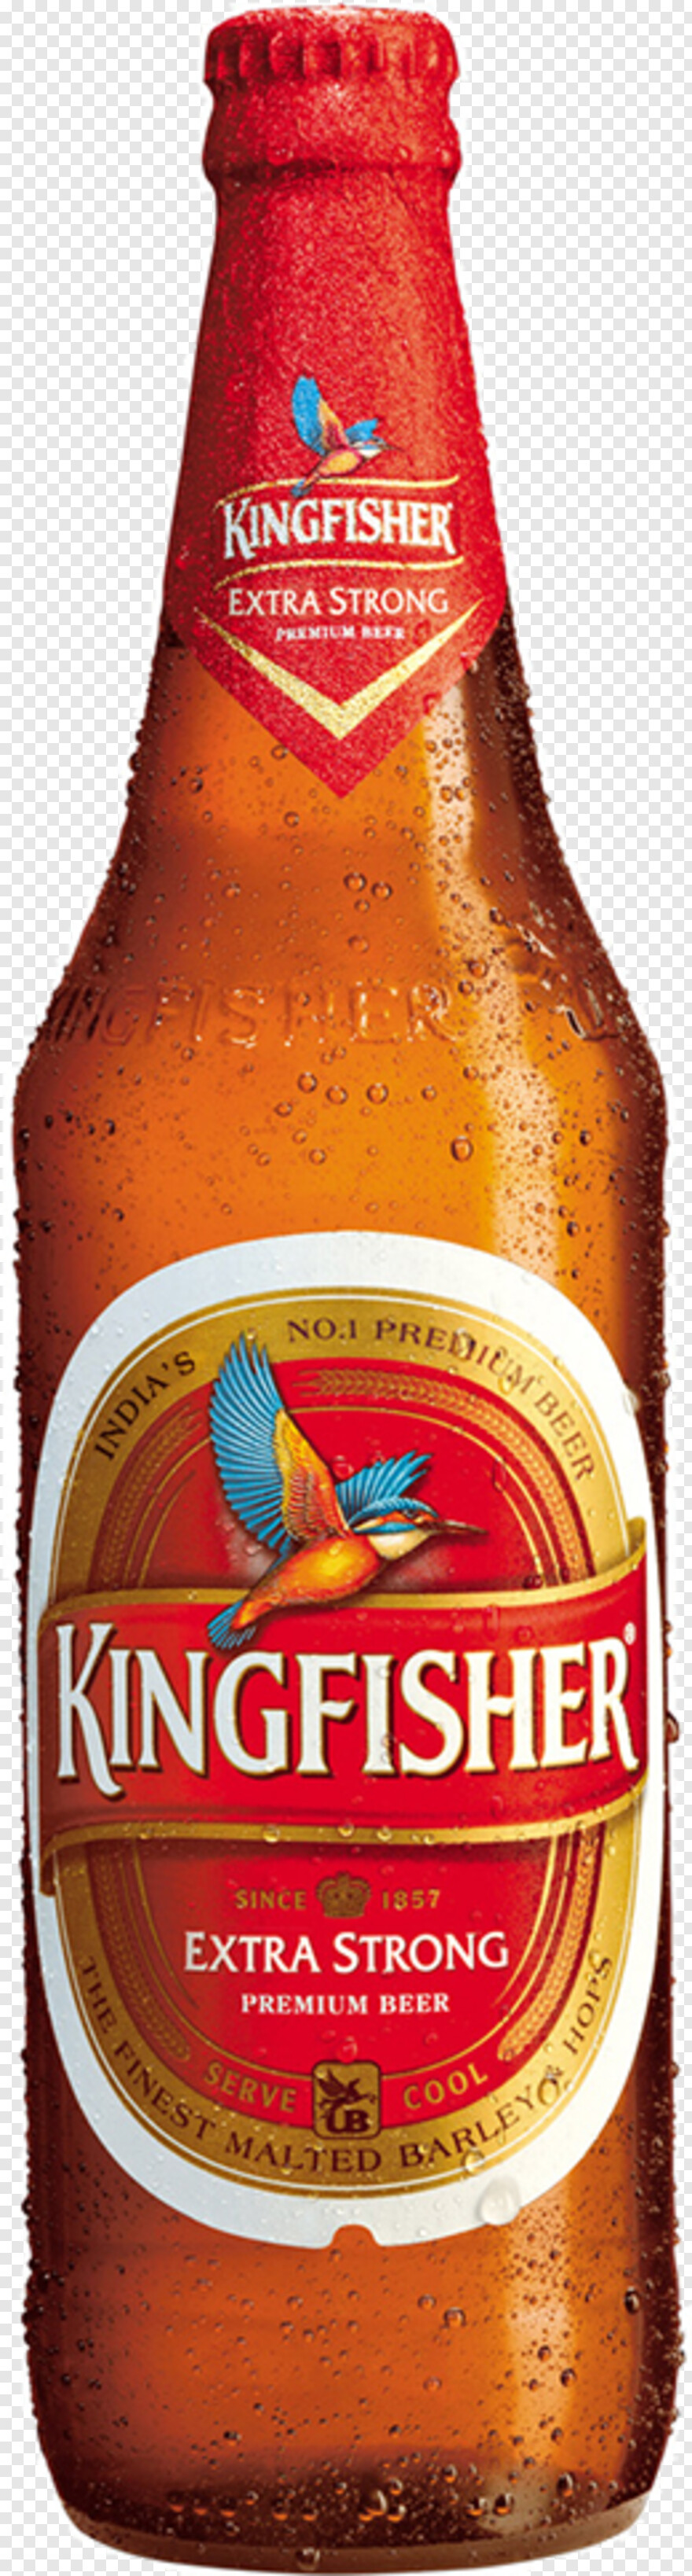 Kingfisher Beer - Free Icon Library